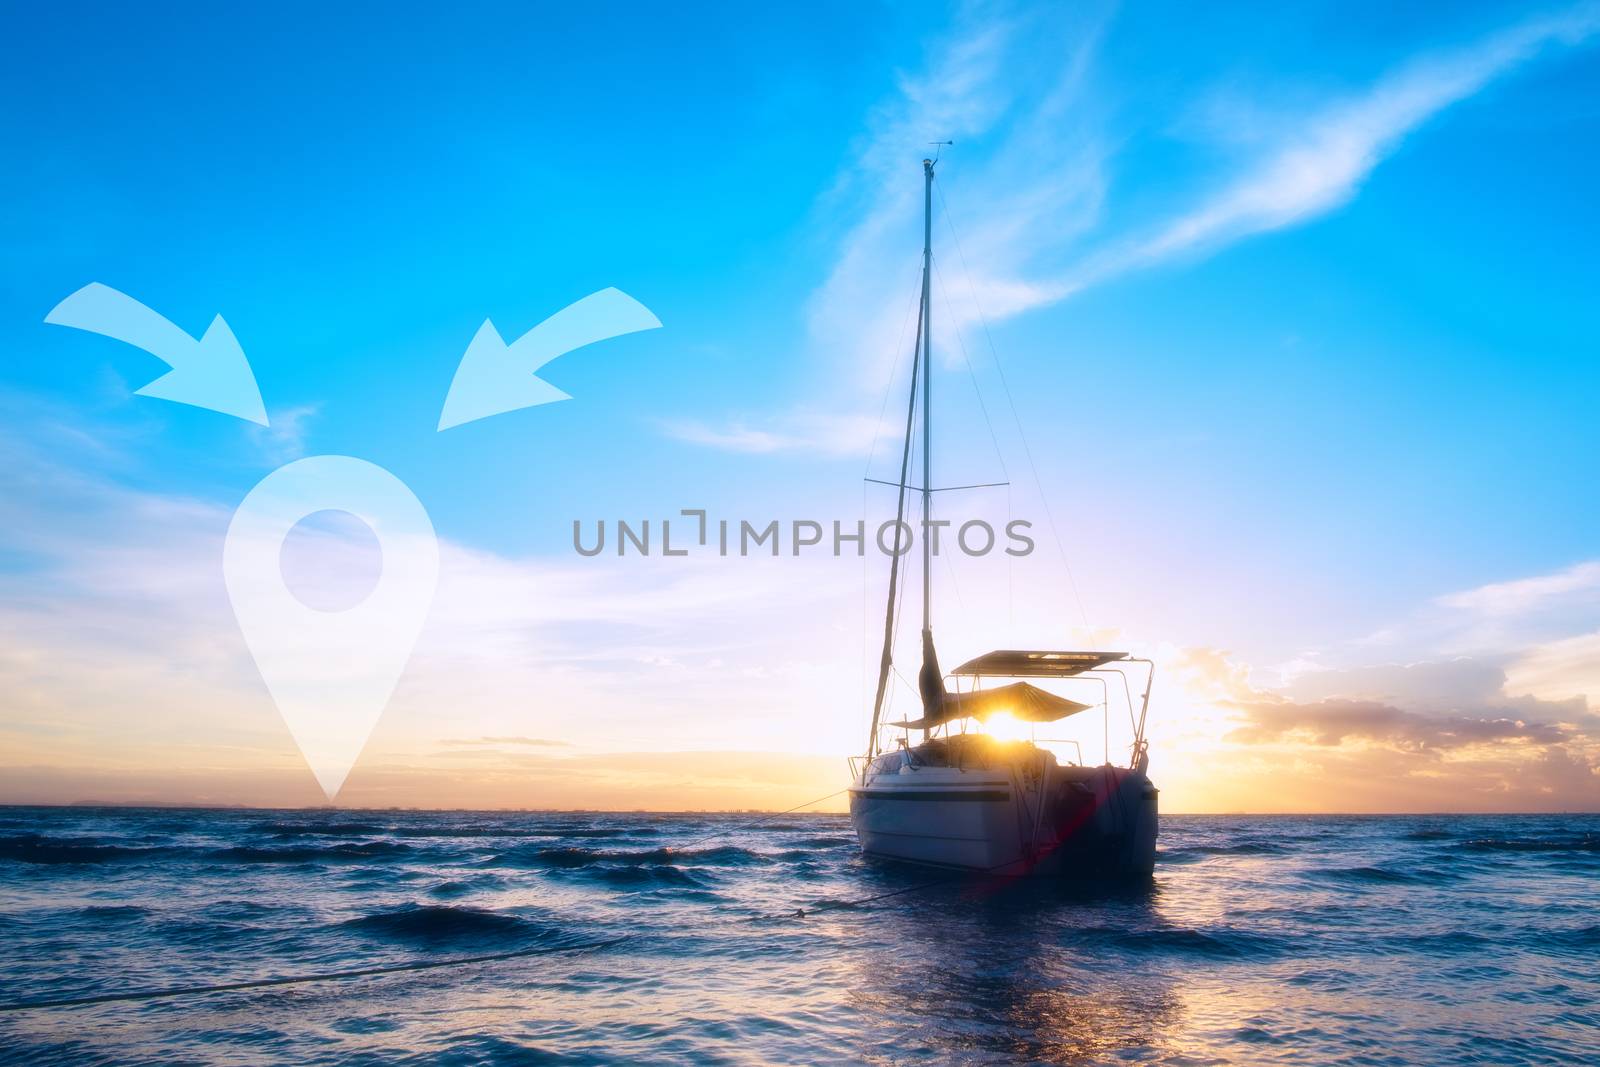 The destination of the path. The boat on the sea. The silhouette boat and sunlight be hide. The small boat is running on the blue sea. Pin icon illustration.